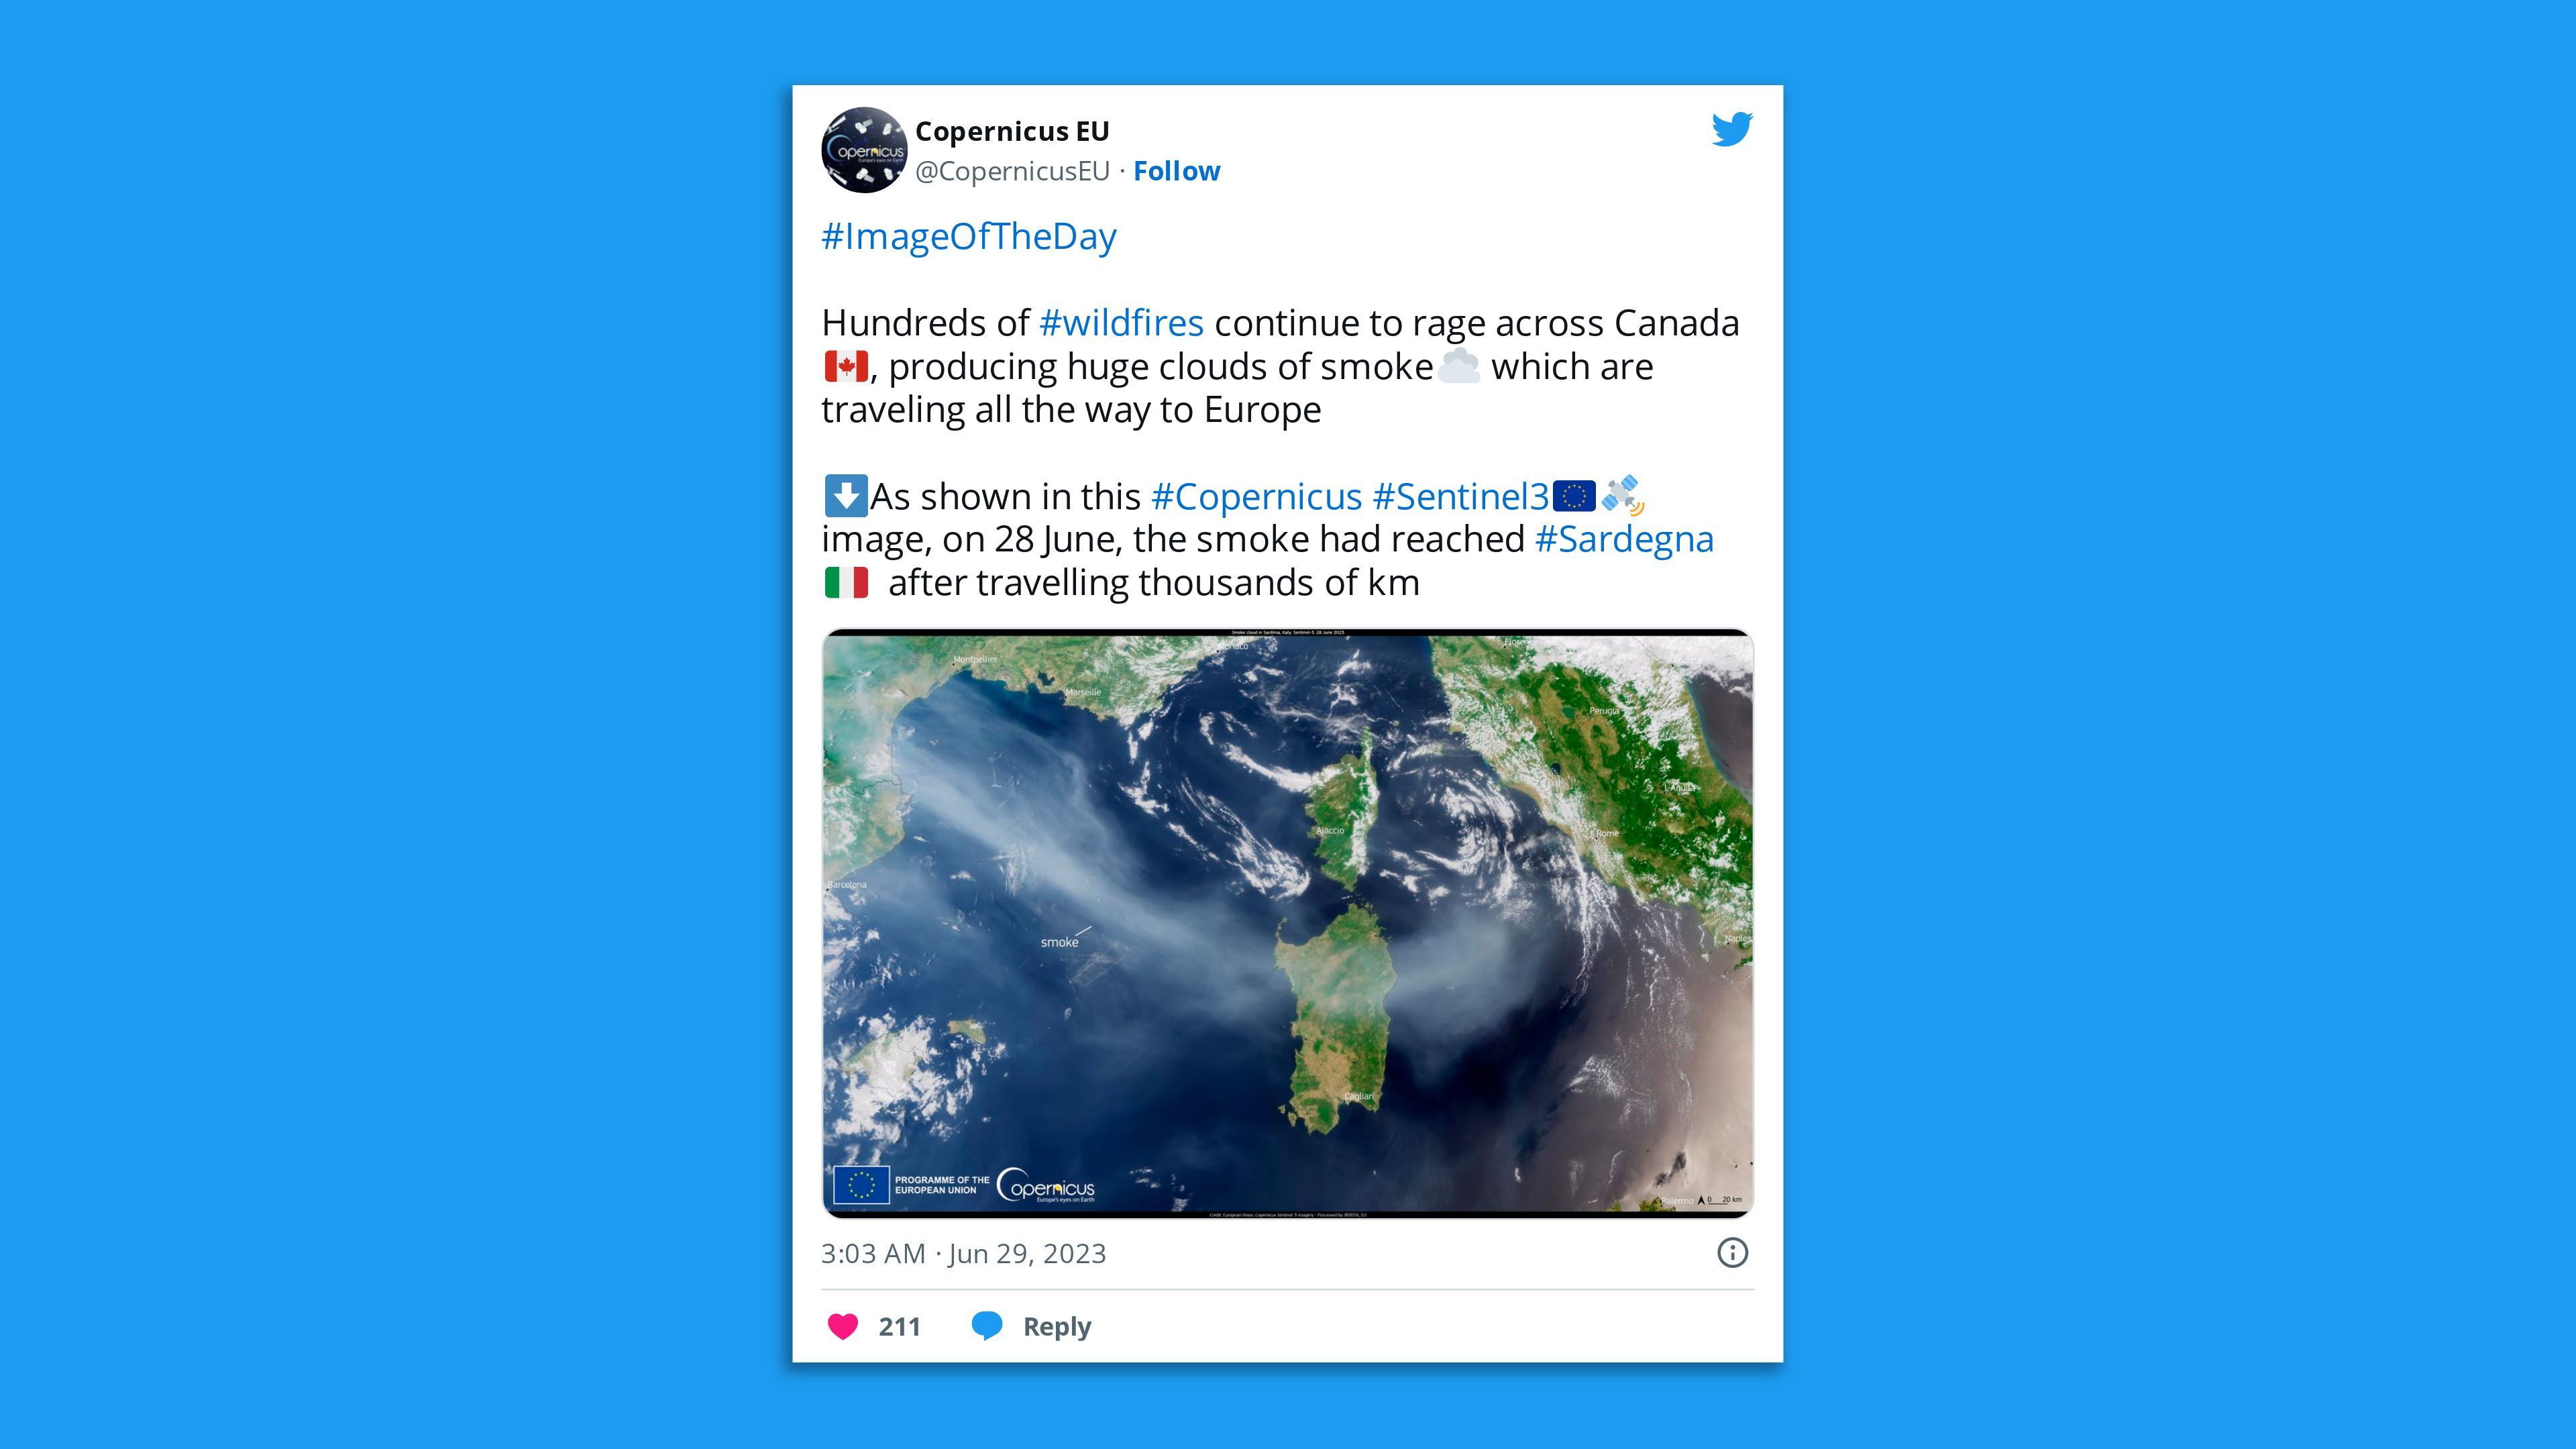 A screenshot of a tweet by Copernicus EU showing a map of wildfire smoke over the European island of Sardinia, saying:  " Hundreds of #wildfires continue to rage across Canada🇨🇦, producing huge clouds of smoke☁️ which are traveling all the way to Europe  ⬇️As shown in this #Copernicus #Sentinel3🇪🇺🛰️image, on 28 June, the smoke had reached #Sardegna🇮🇹  after travelling thousands of km."